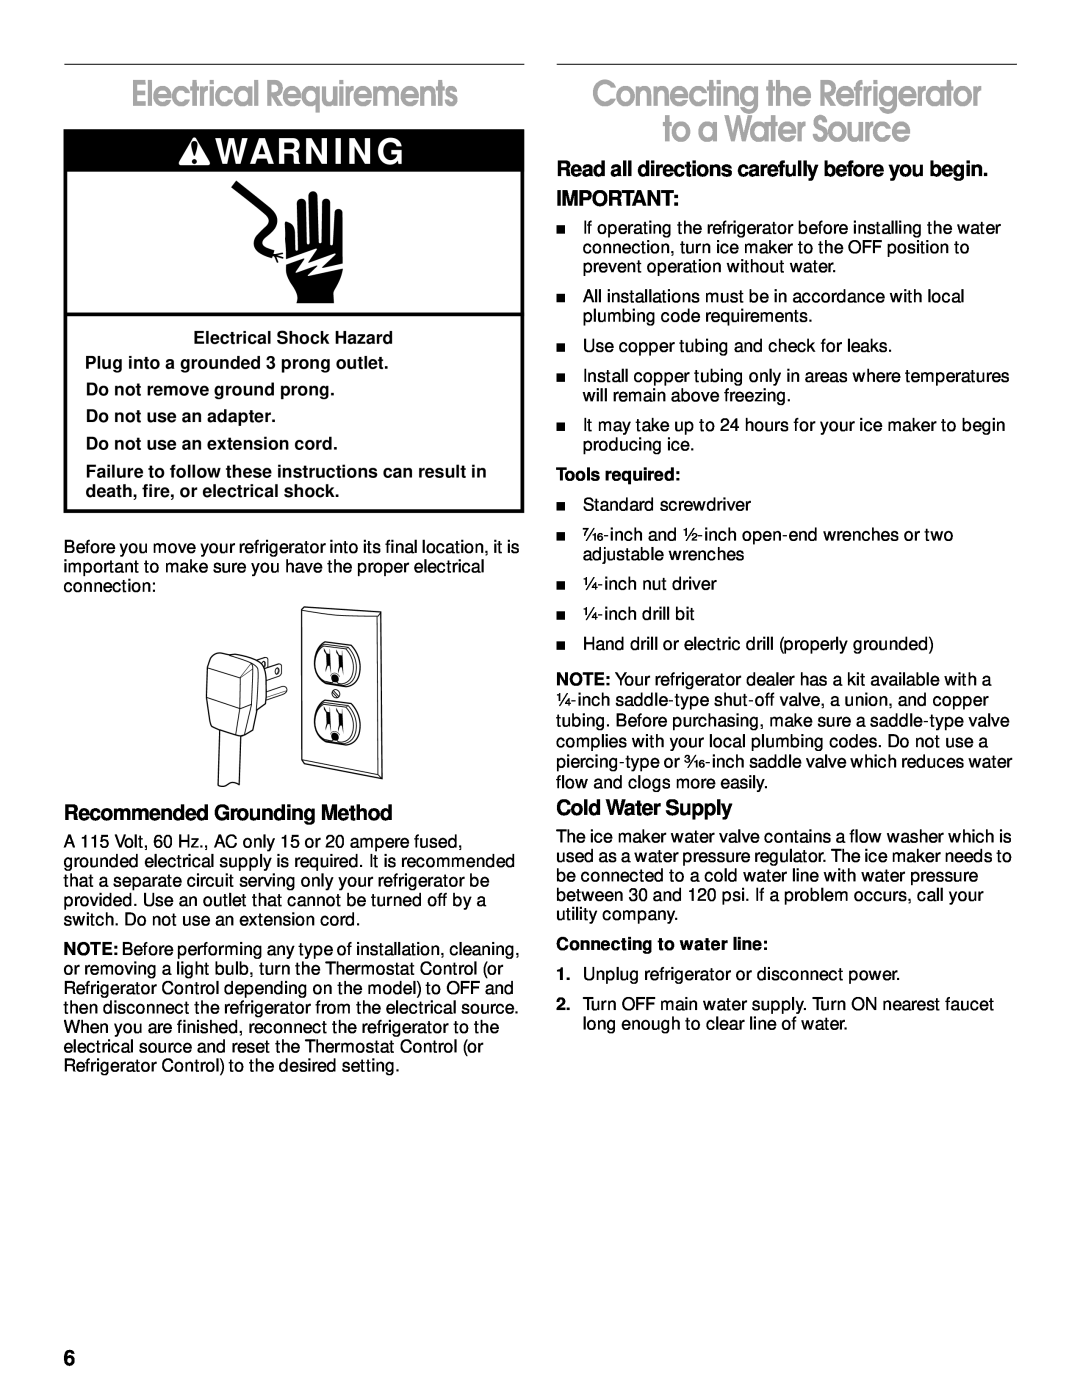 Whirlpool 2199011 Electrical Requirements, Connecting the Refrigerator to a Water Source, Recommended Grounding Method 